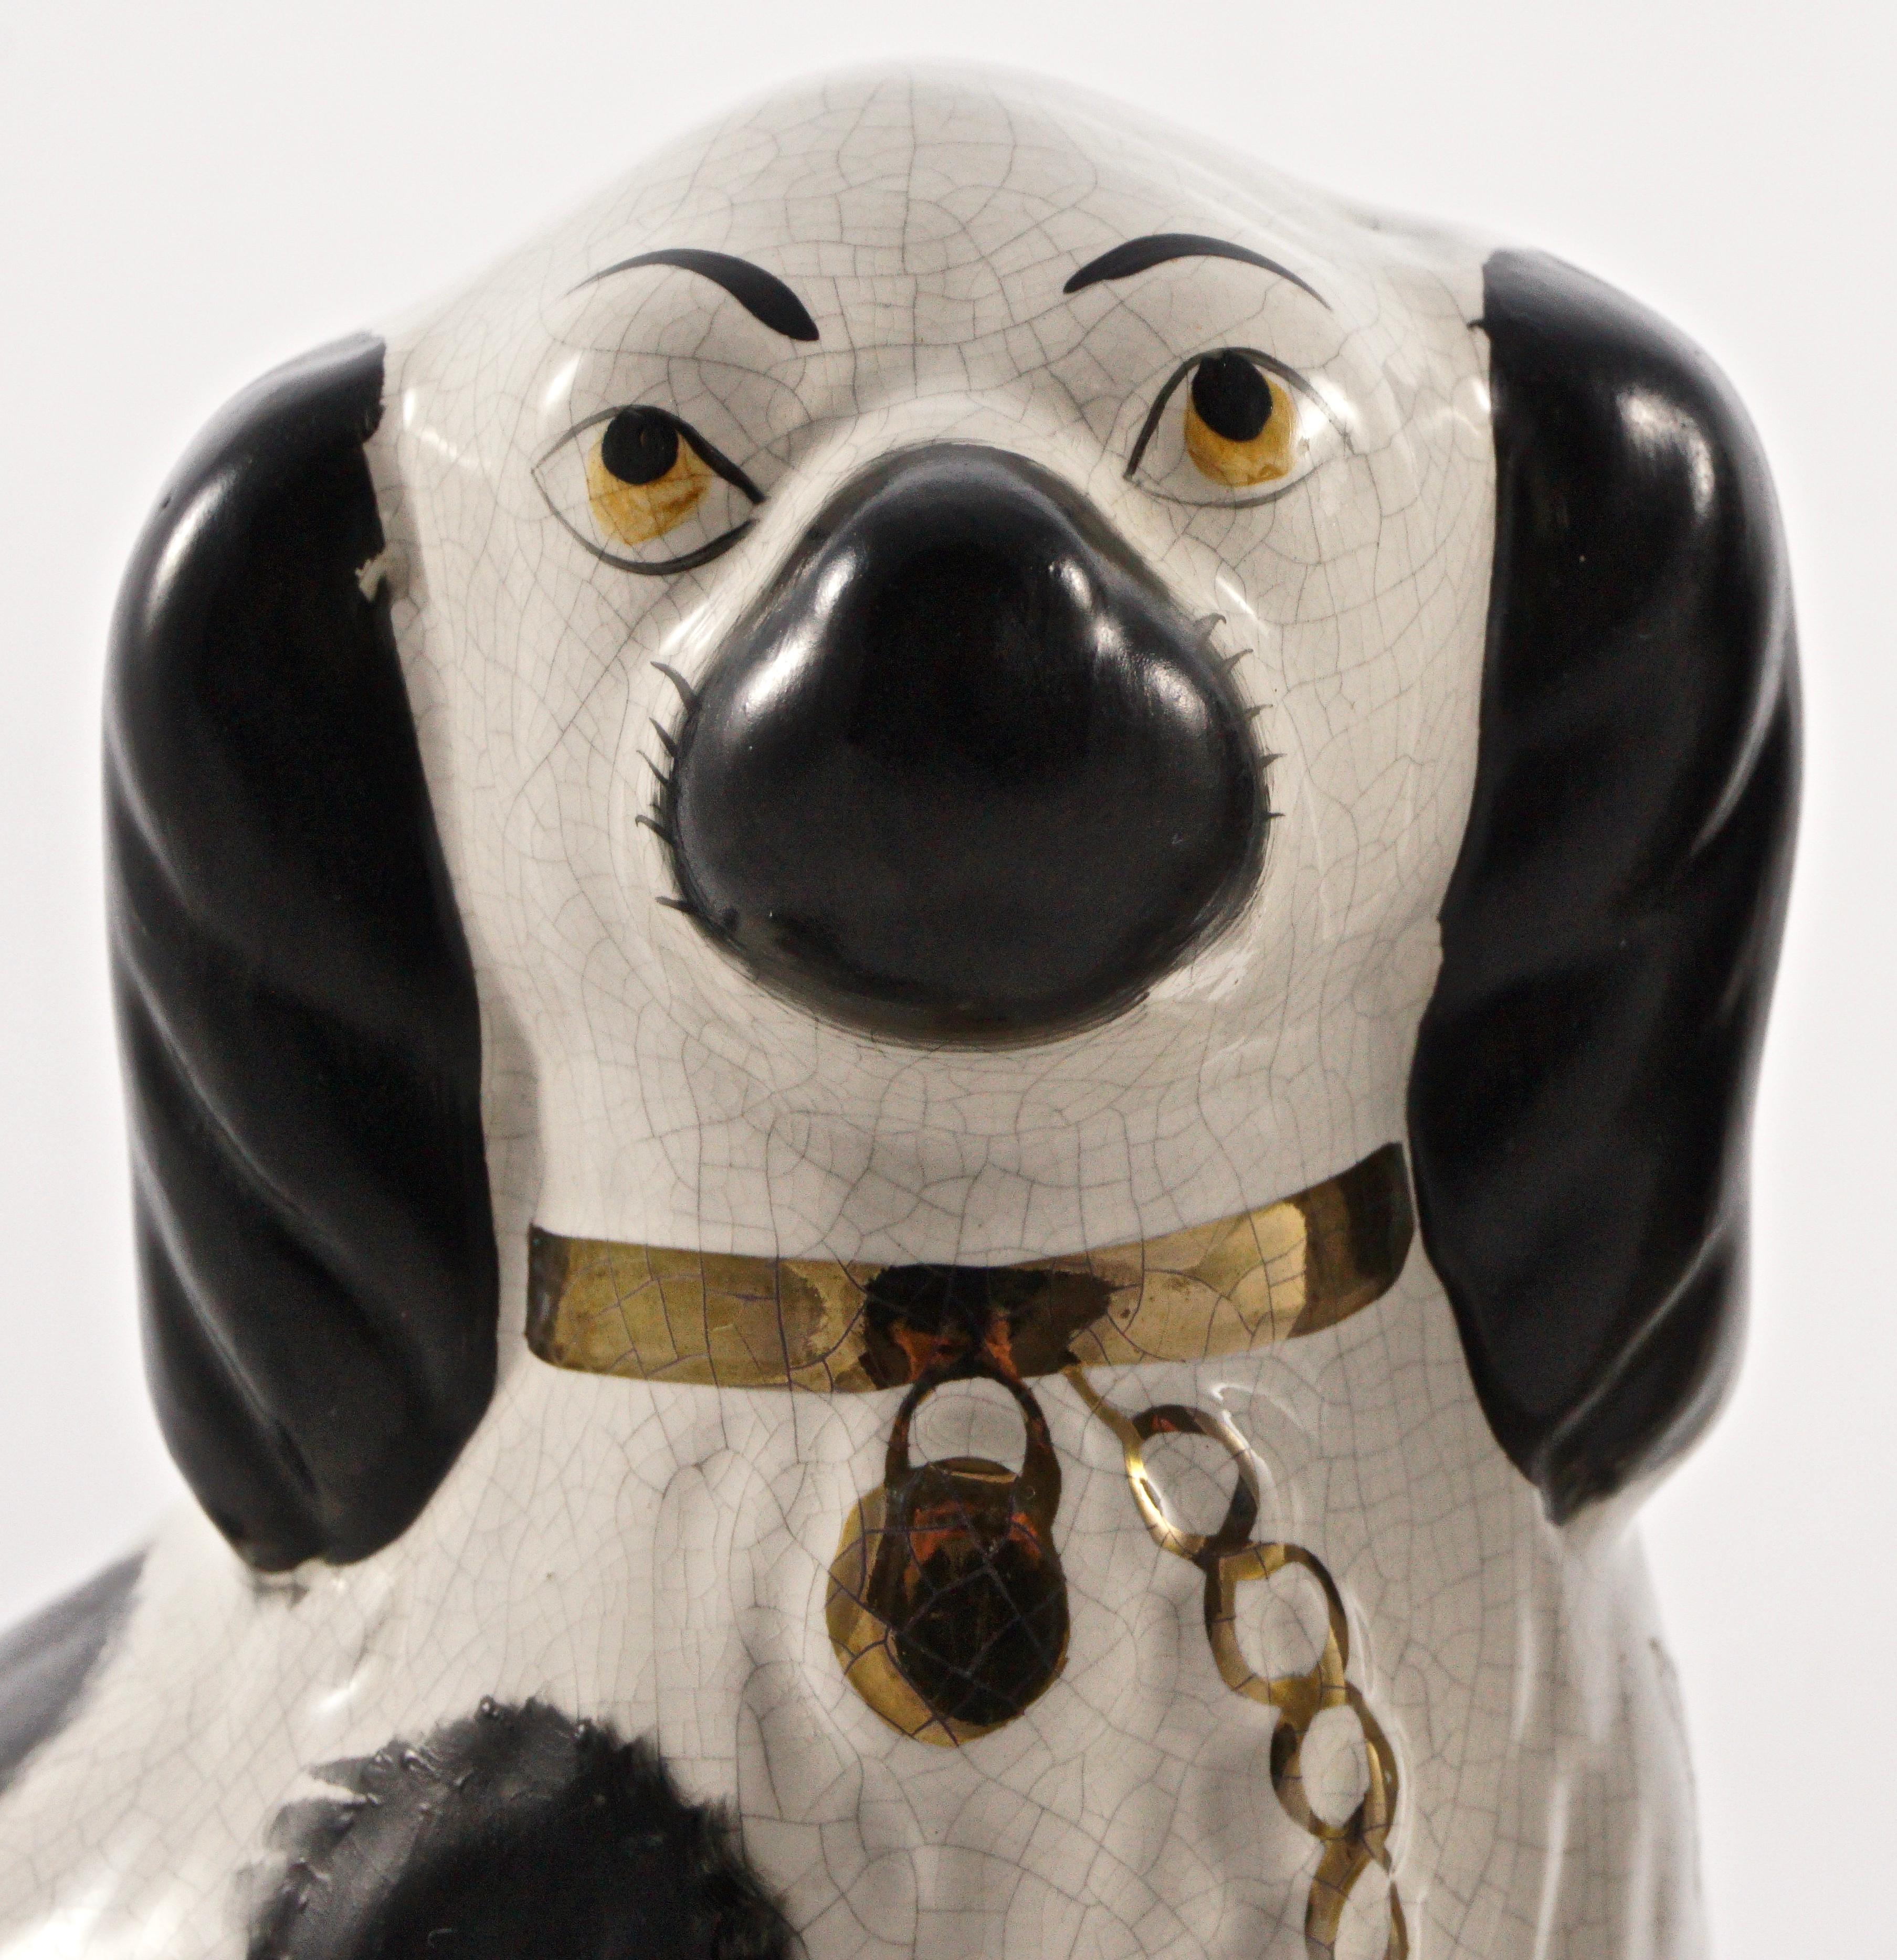 Pair of classic Staffordshire pottery hand painted black and white dogs decorated with gold accents, circa early twentieth century. They measure approximately height 21.8cm / 8.58 inches by width at the base 17.3cm / 6.8 inches, and have typical